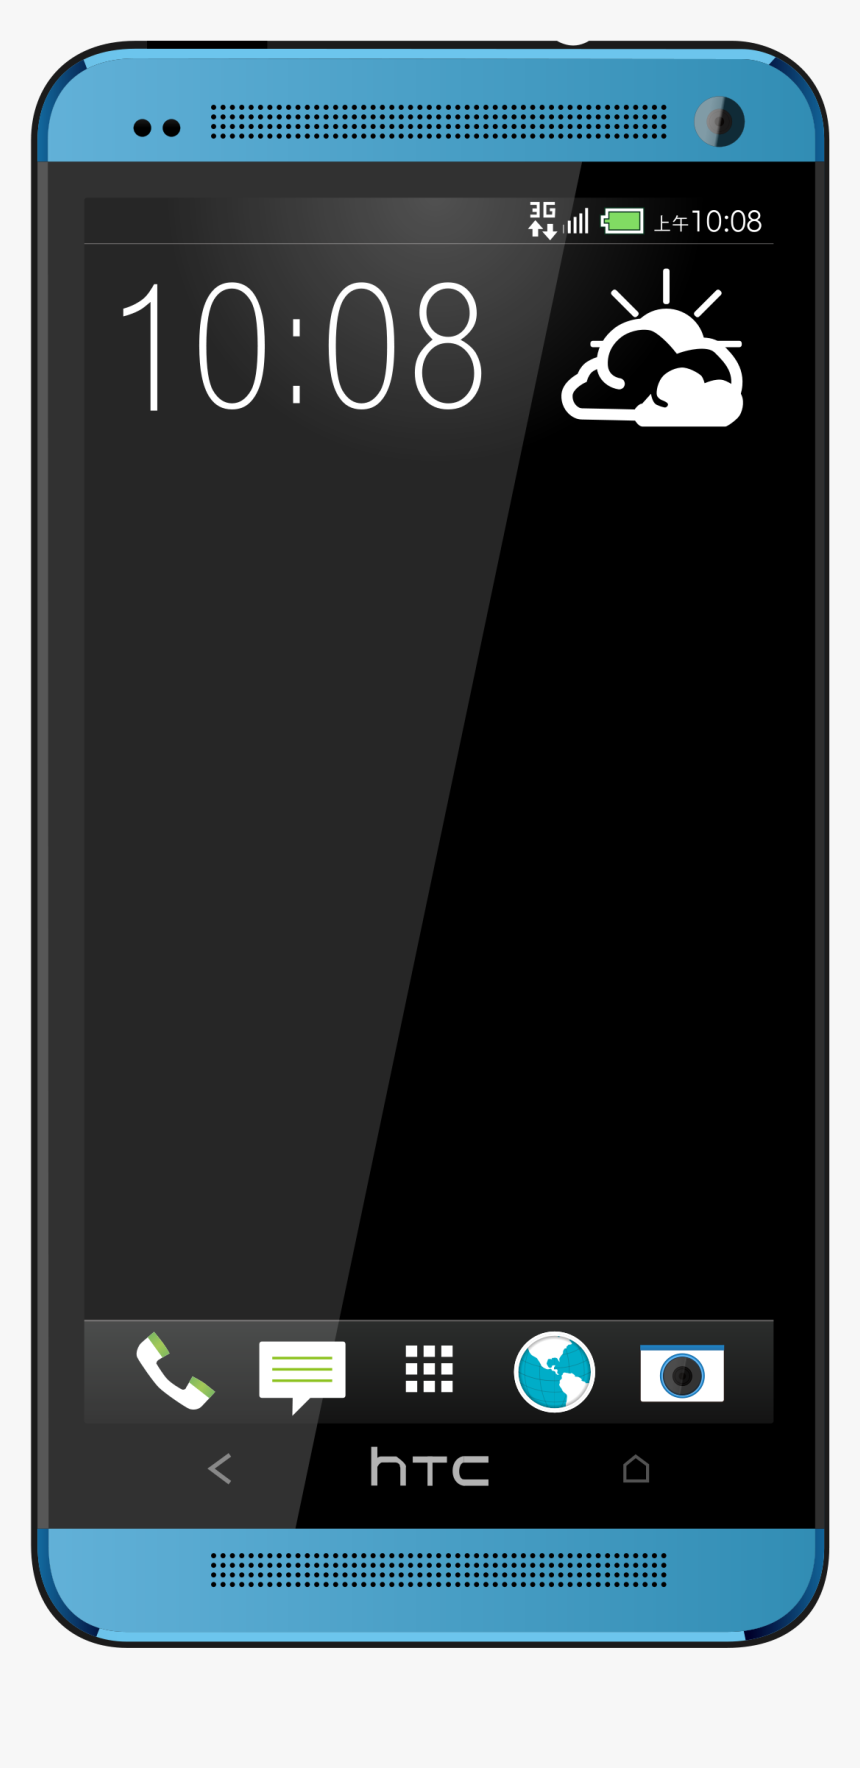 Android Smartphone - Smart Phone Image Png, Transparent Png, Free Download